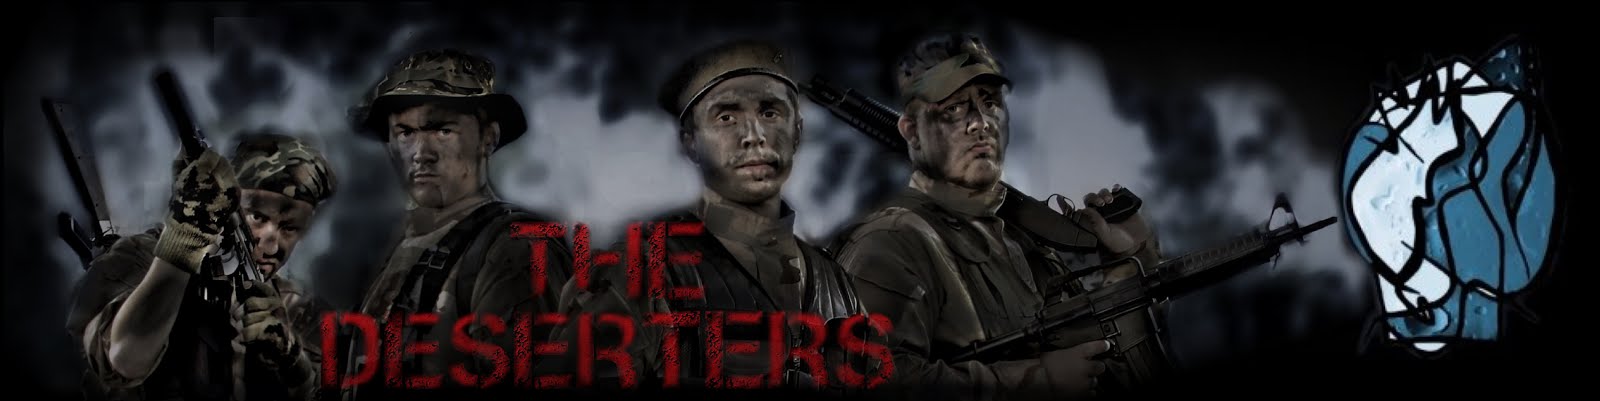 The Deserters - OFFICIAL SITE